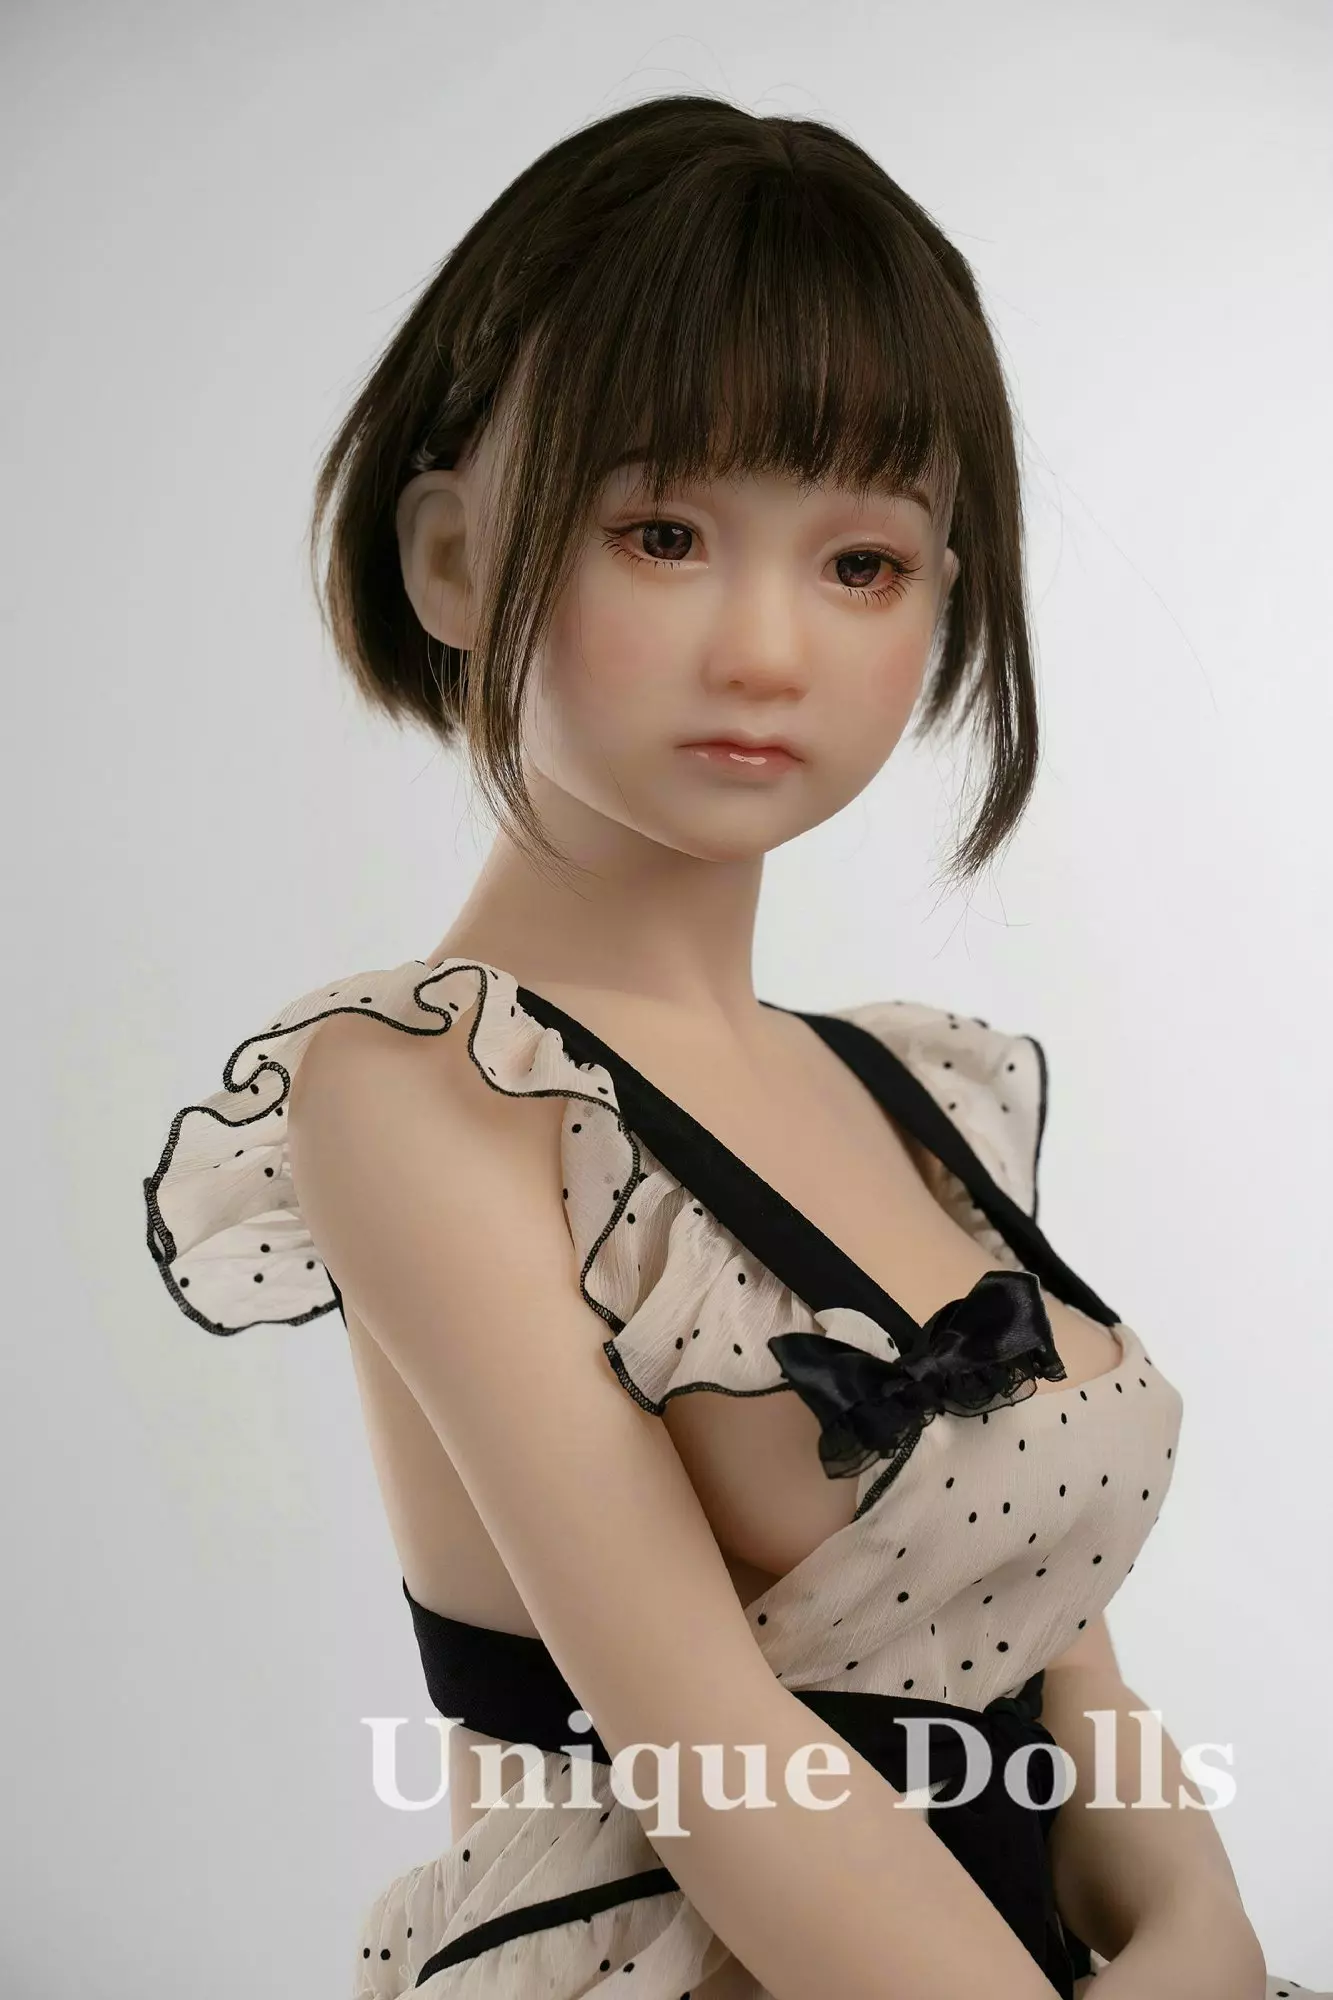 AXBDOLL 130CM A15# TPE C-CUP ANIME LOVE DOLL LIFE SIZE SEX DOLLS